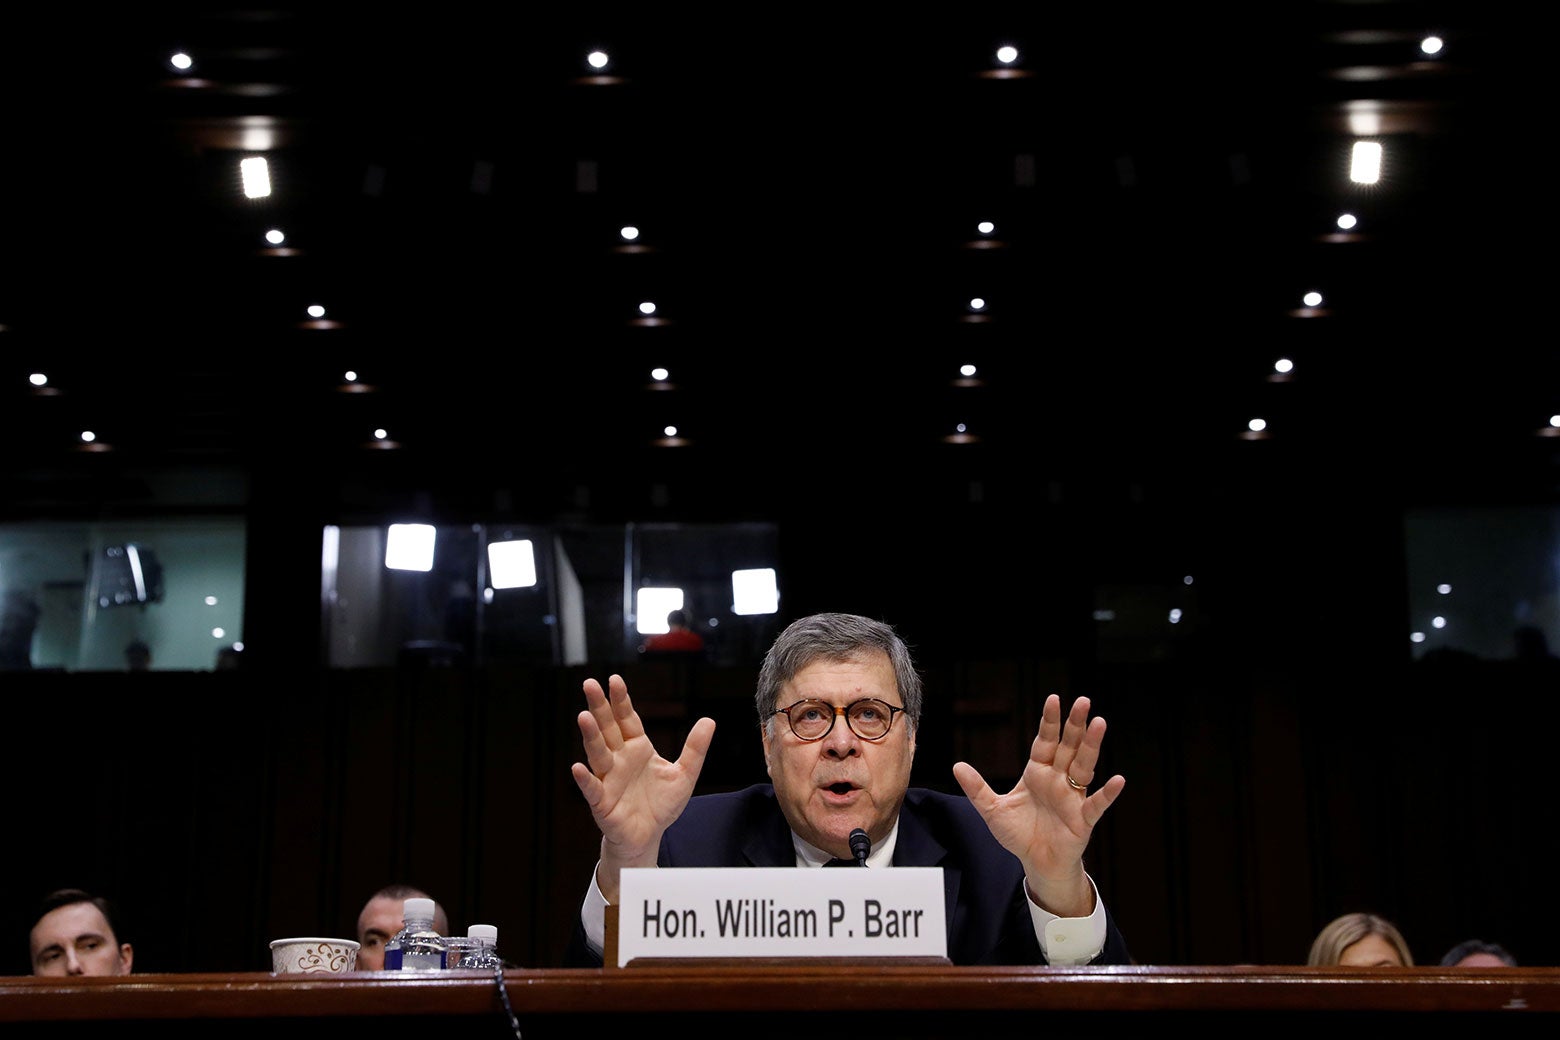 William Barr in a hearing room.